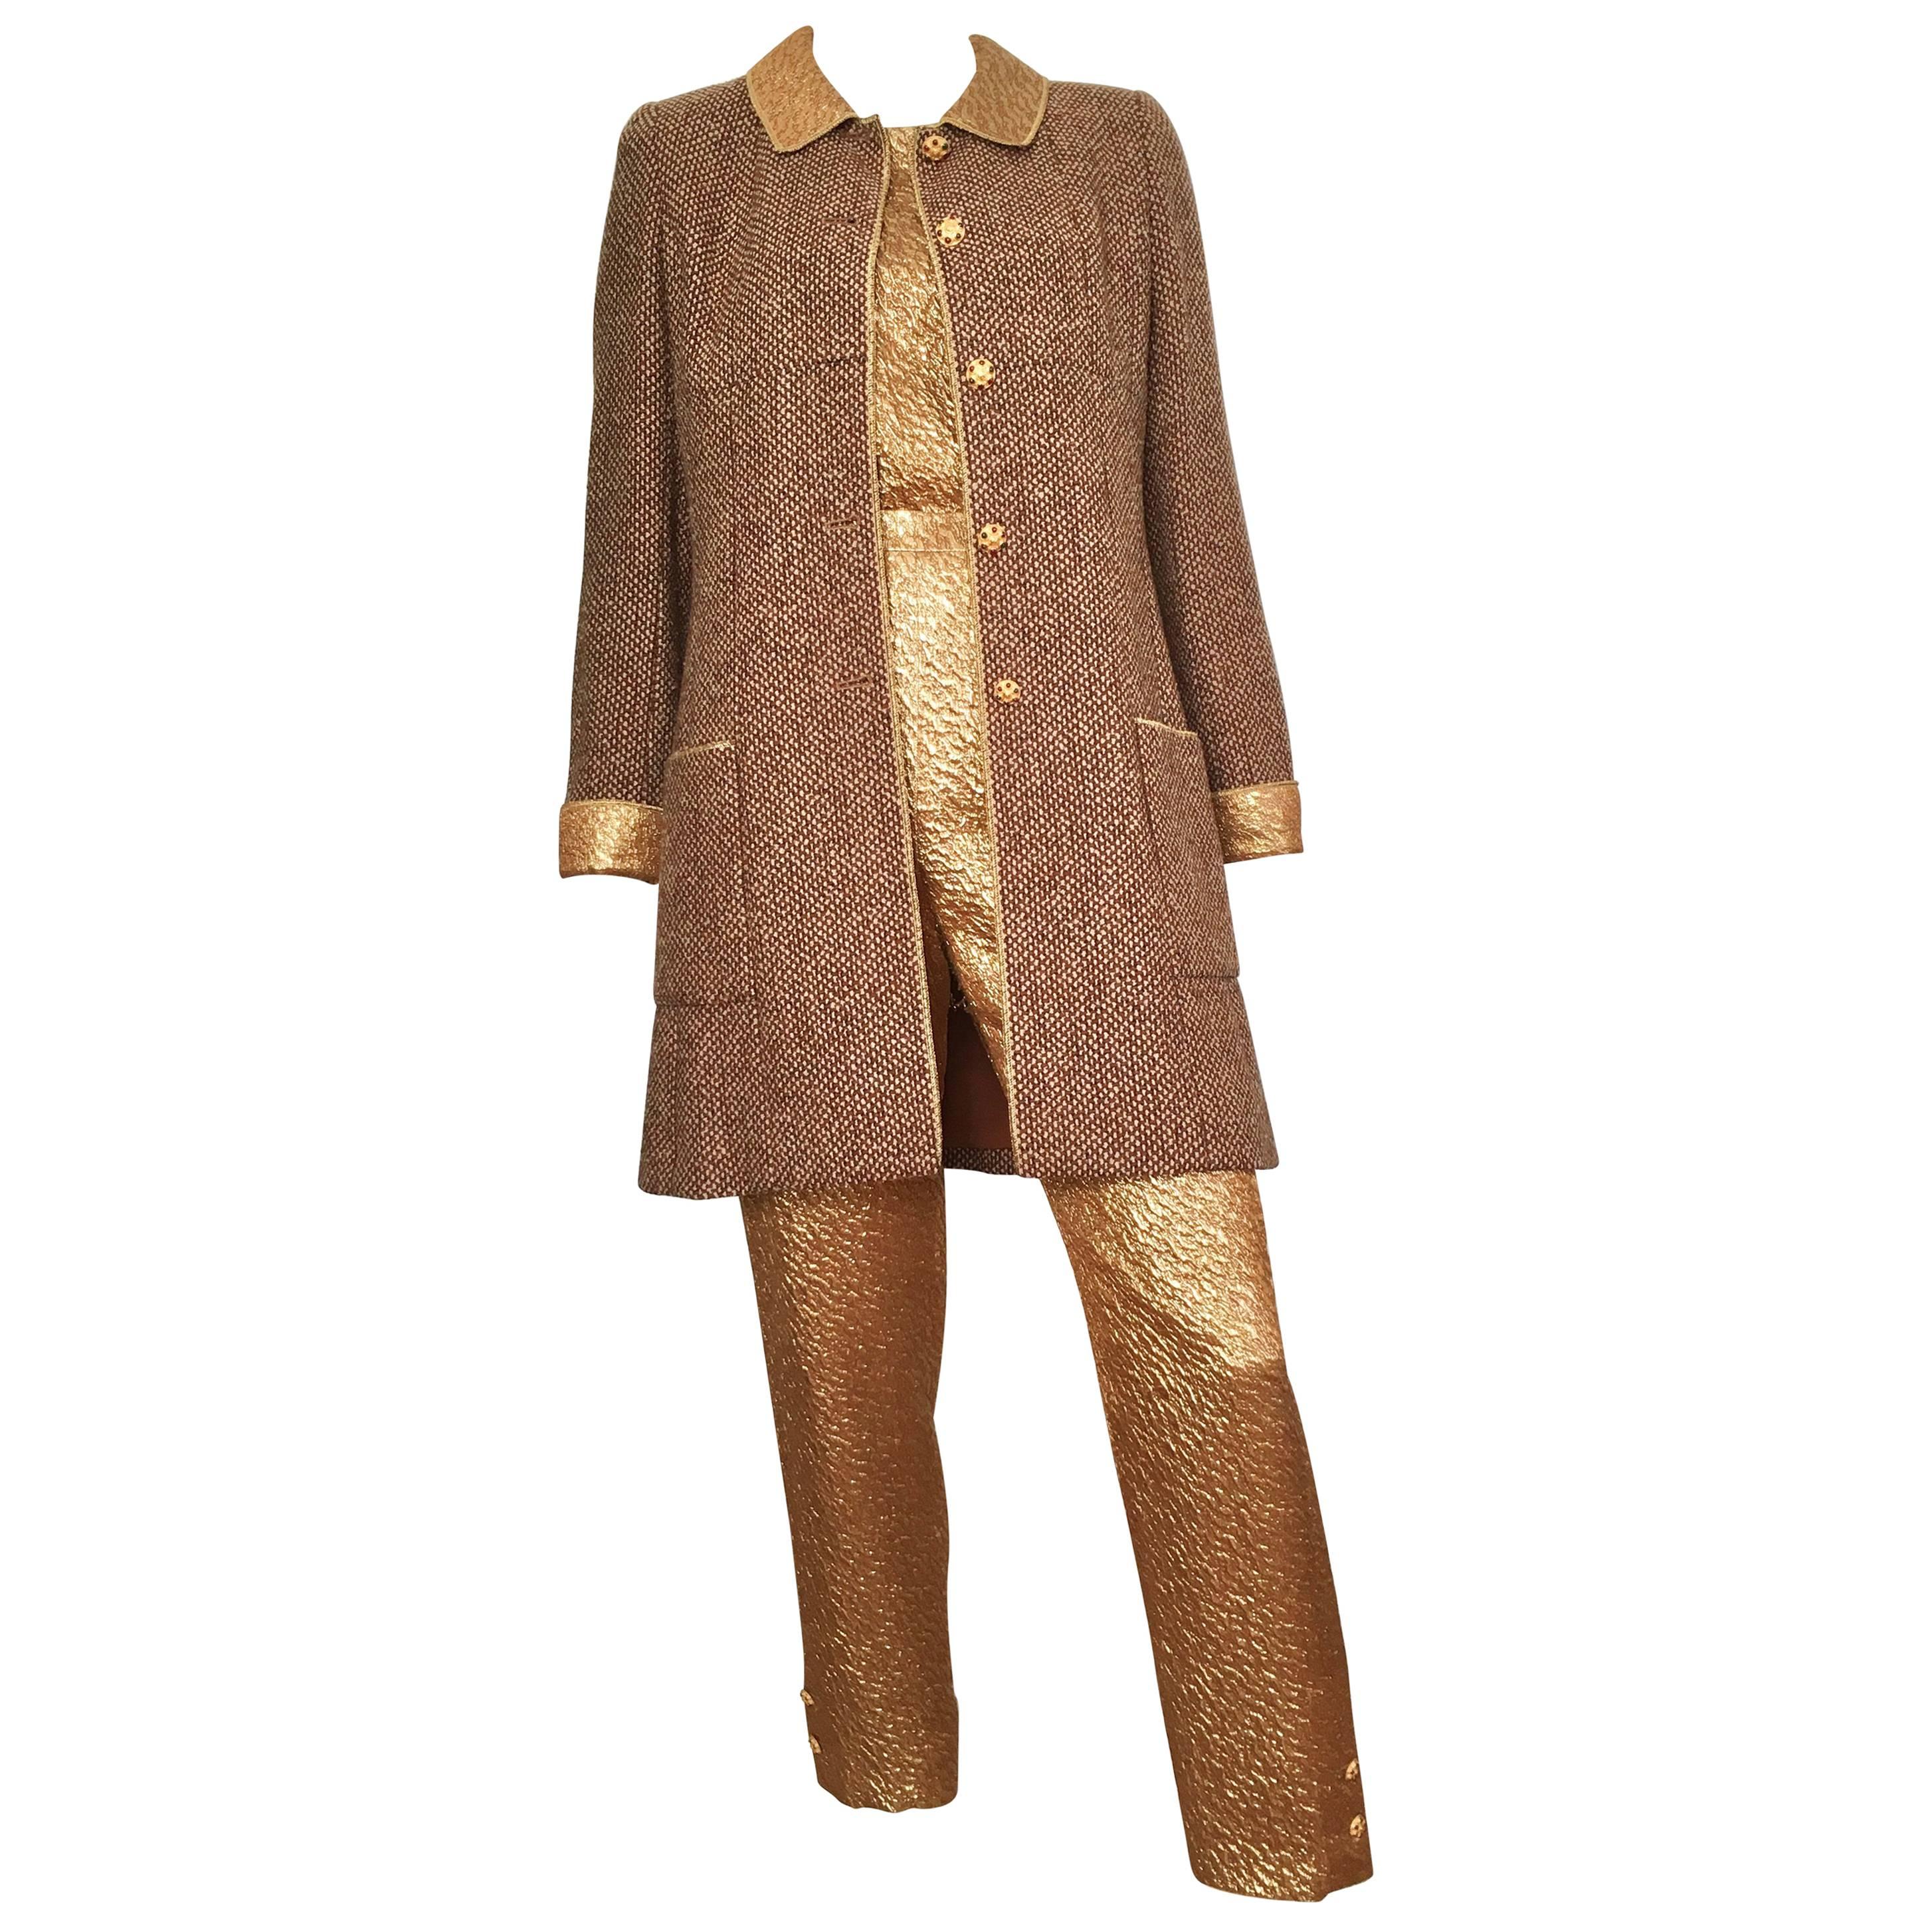 Chanel 1996 Gold Top & Pants with Tan Tweed Jacket Set Size 4. For Sale